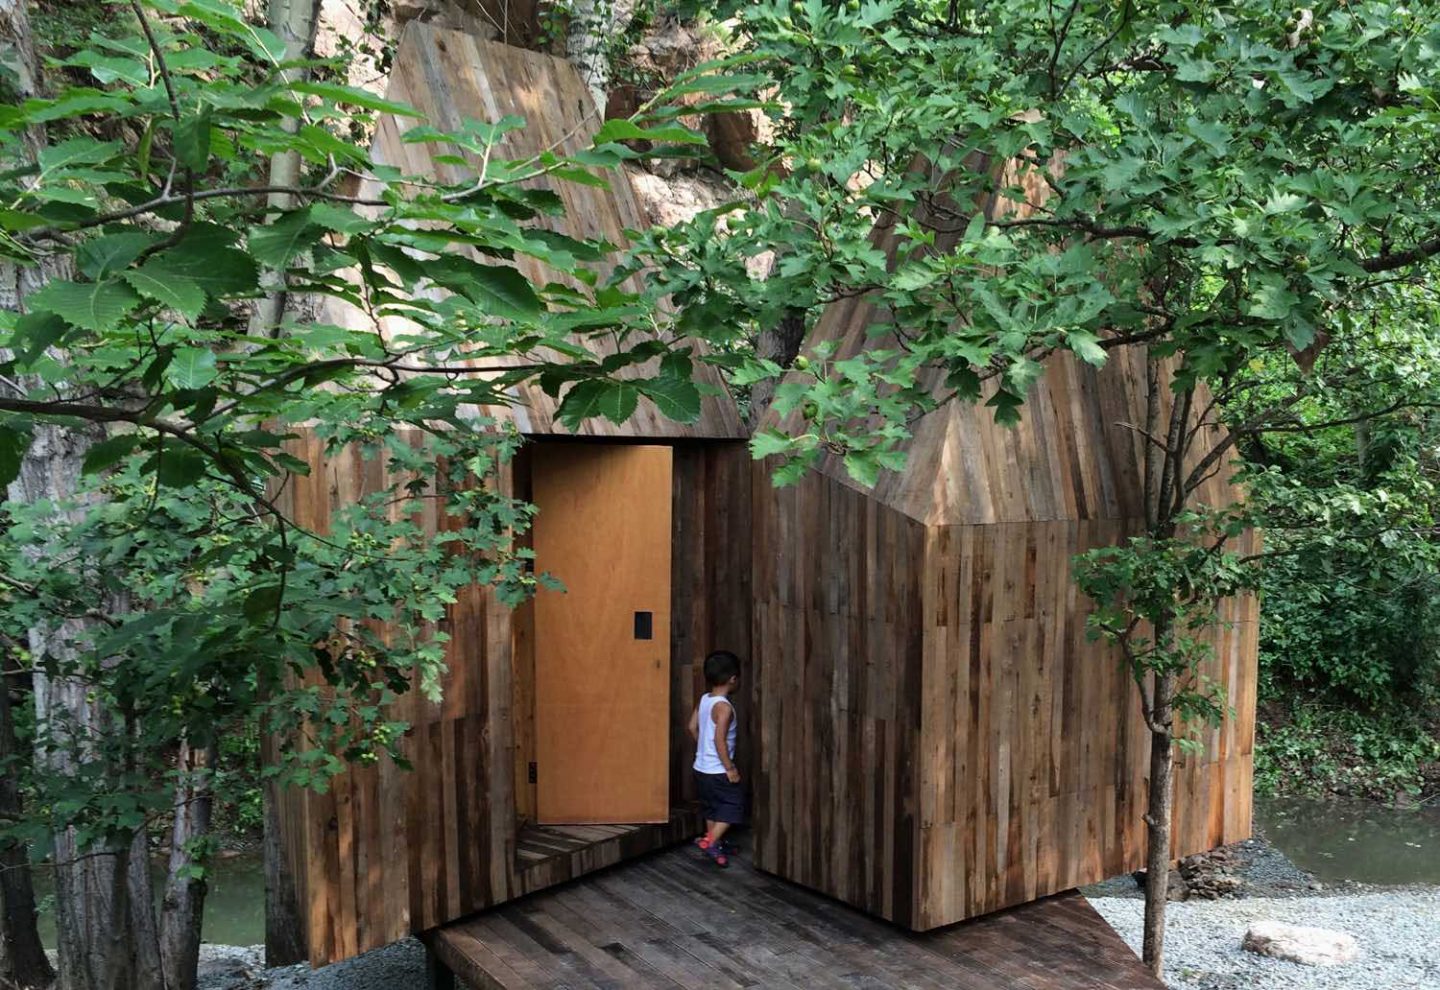 Architecture-Wee-Studio-Treehouse-8